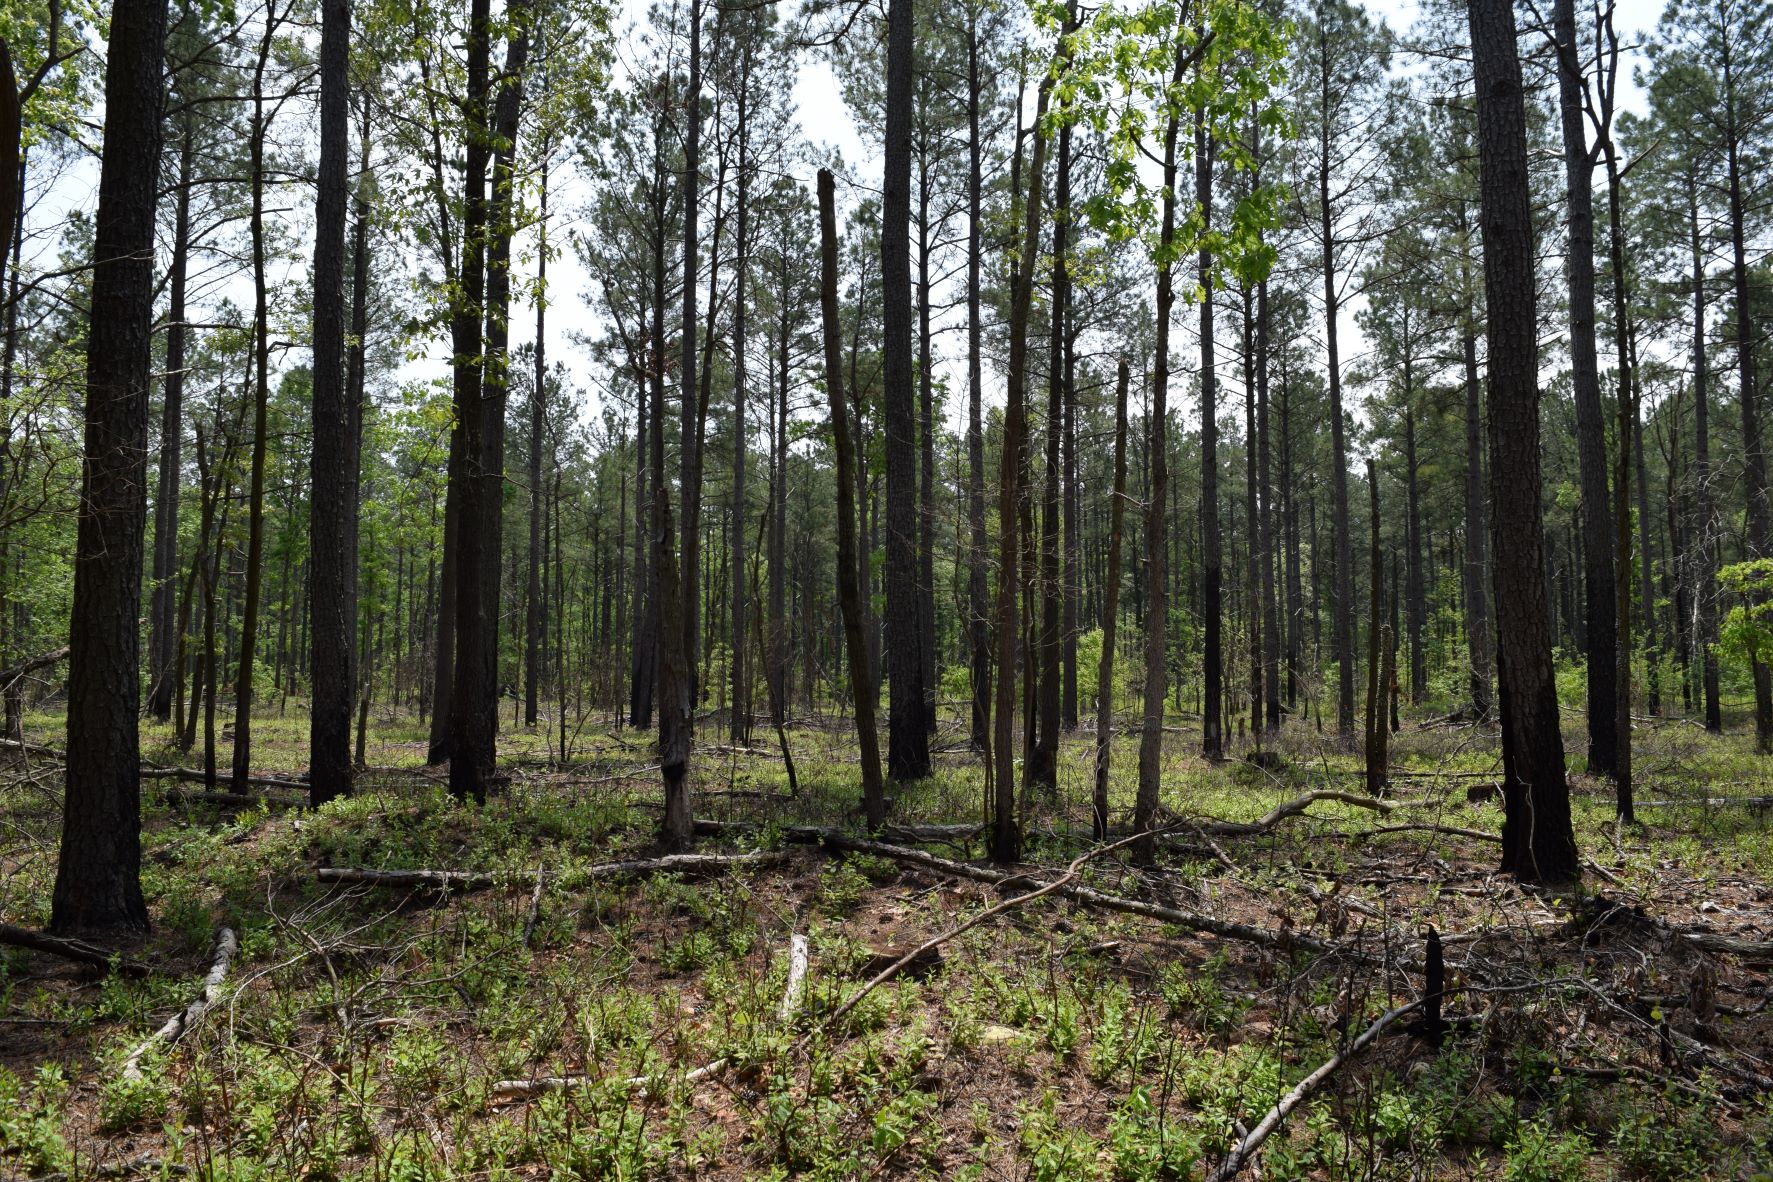 Several tall thin trees line a forest floor.